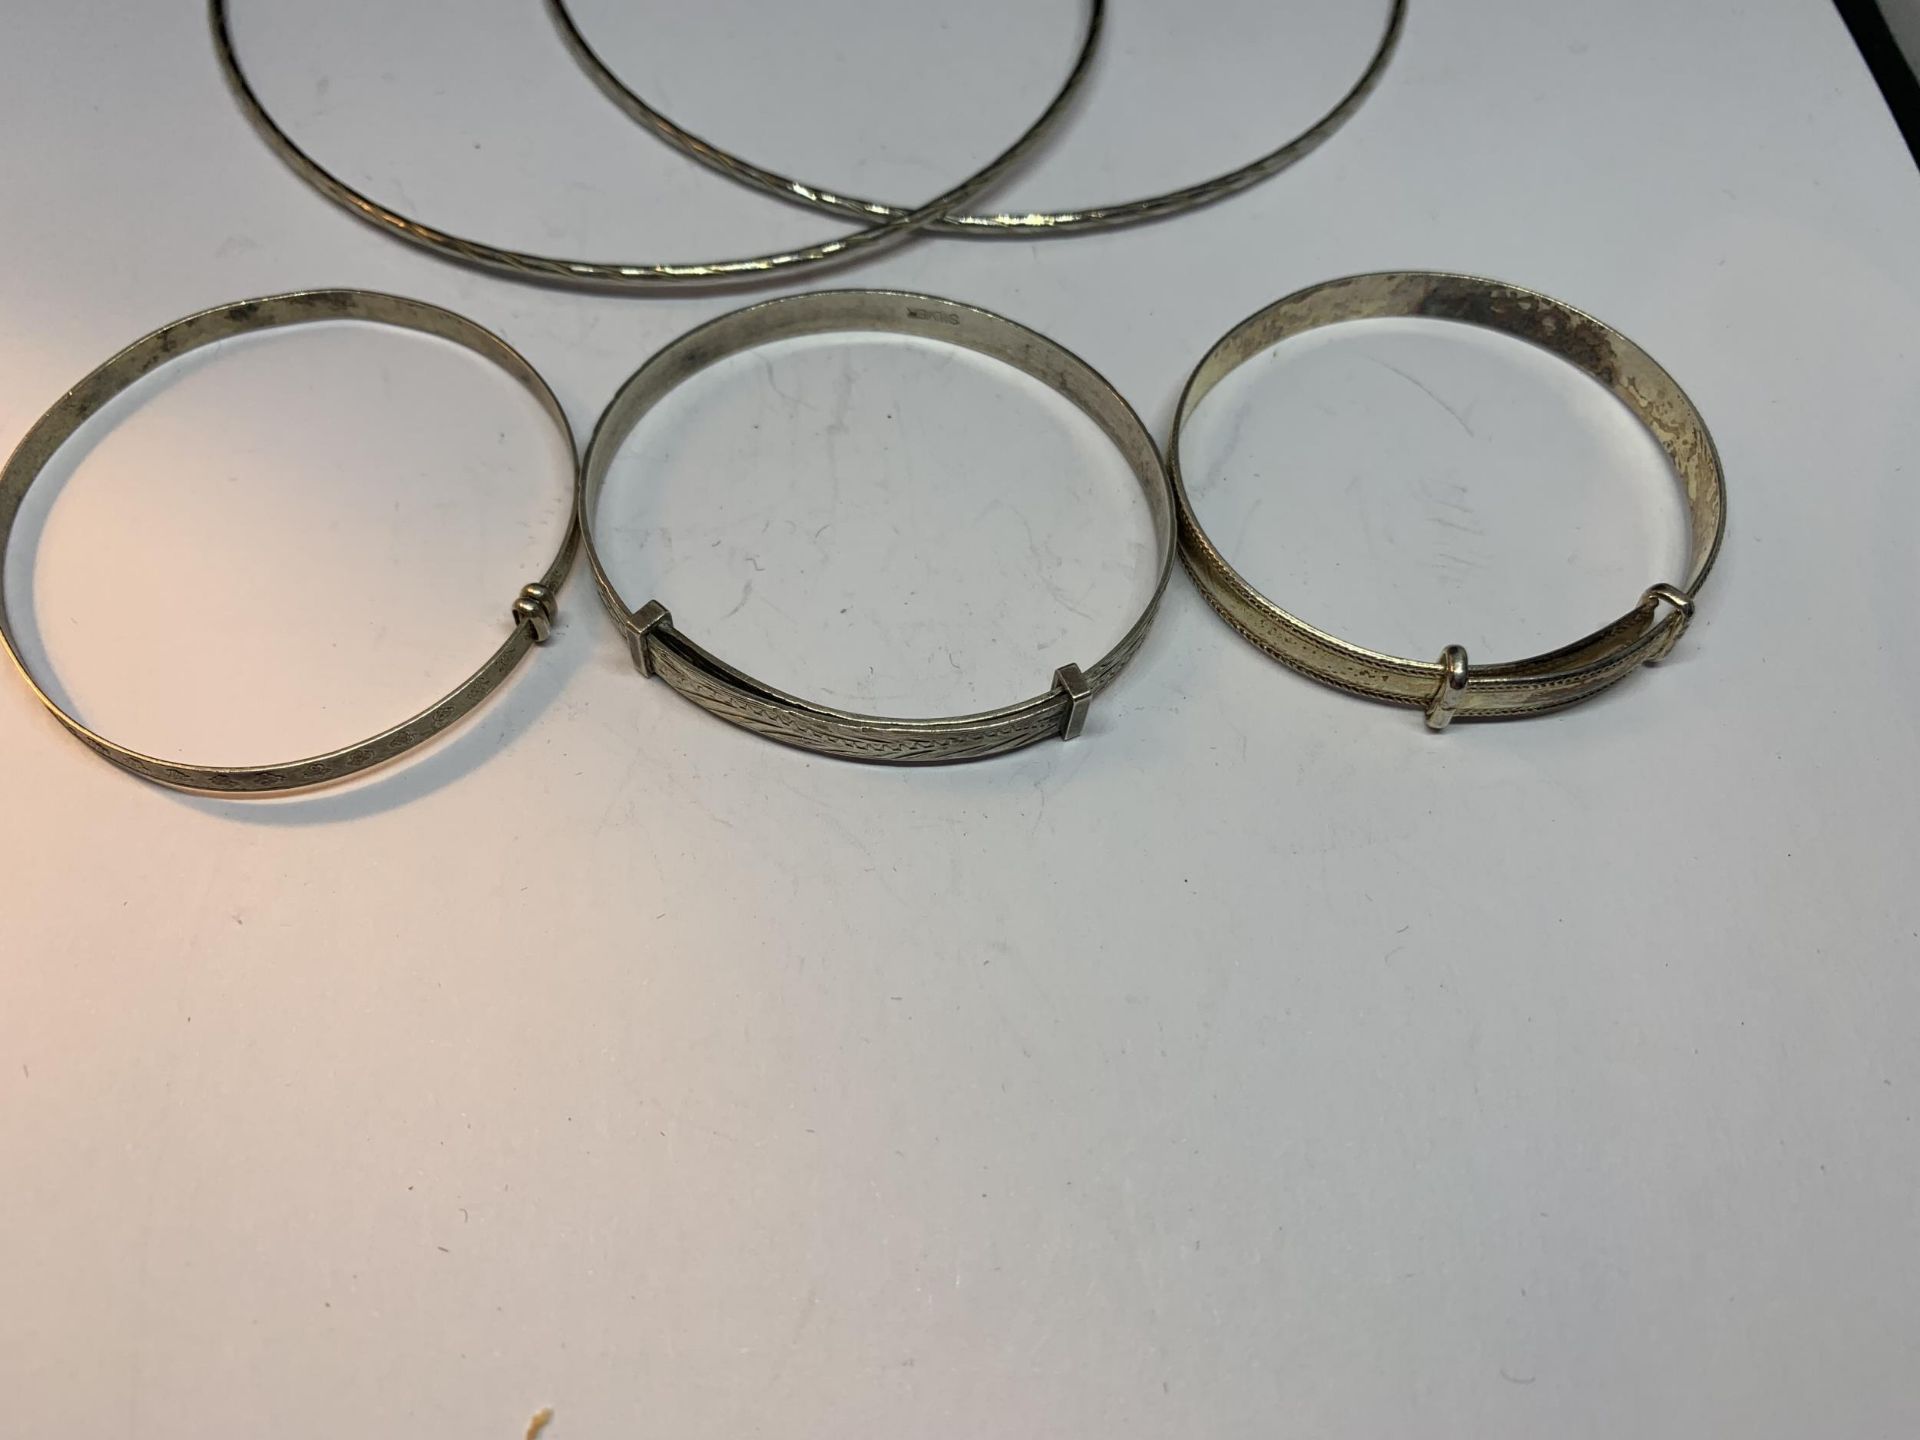 THREE SILVER CHILDRENS BANGLES AND A PAIR OF LARGE EARRINGS - Image 2 of 3